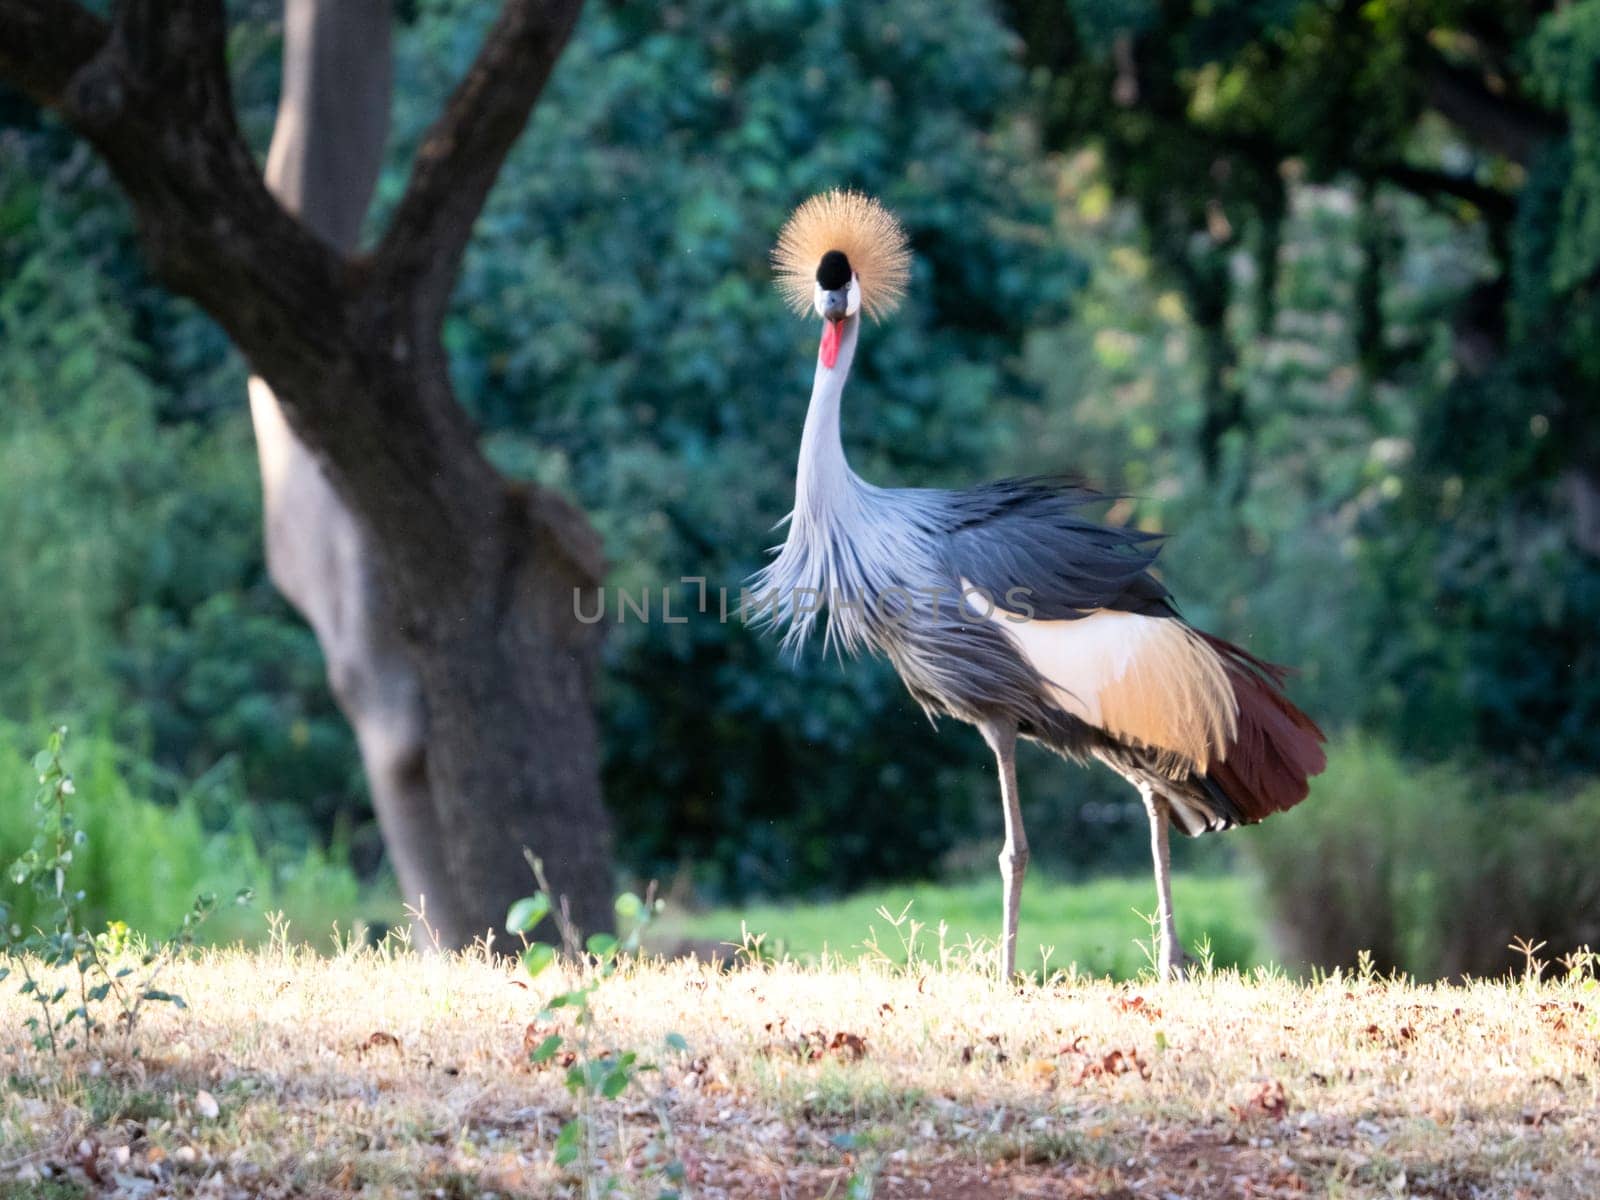 Grey crowned crane, a bird with a golden crest and a red patch on its neck, standing on one leg in a grassy area at the Honolulu Zoo.